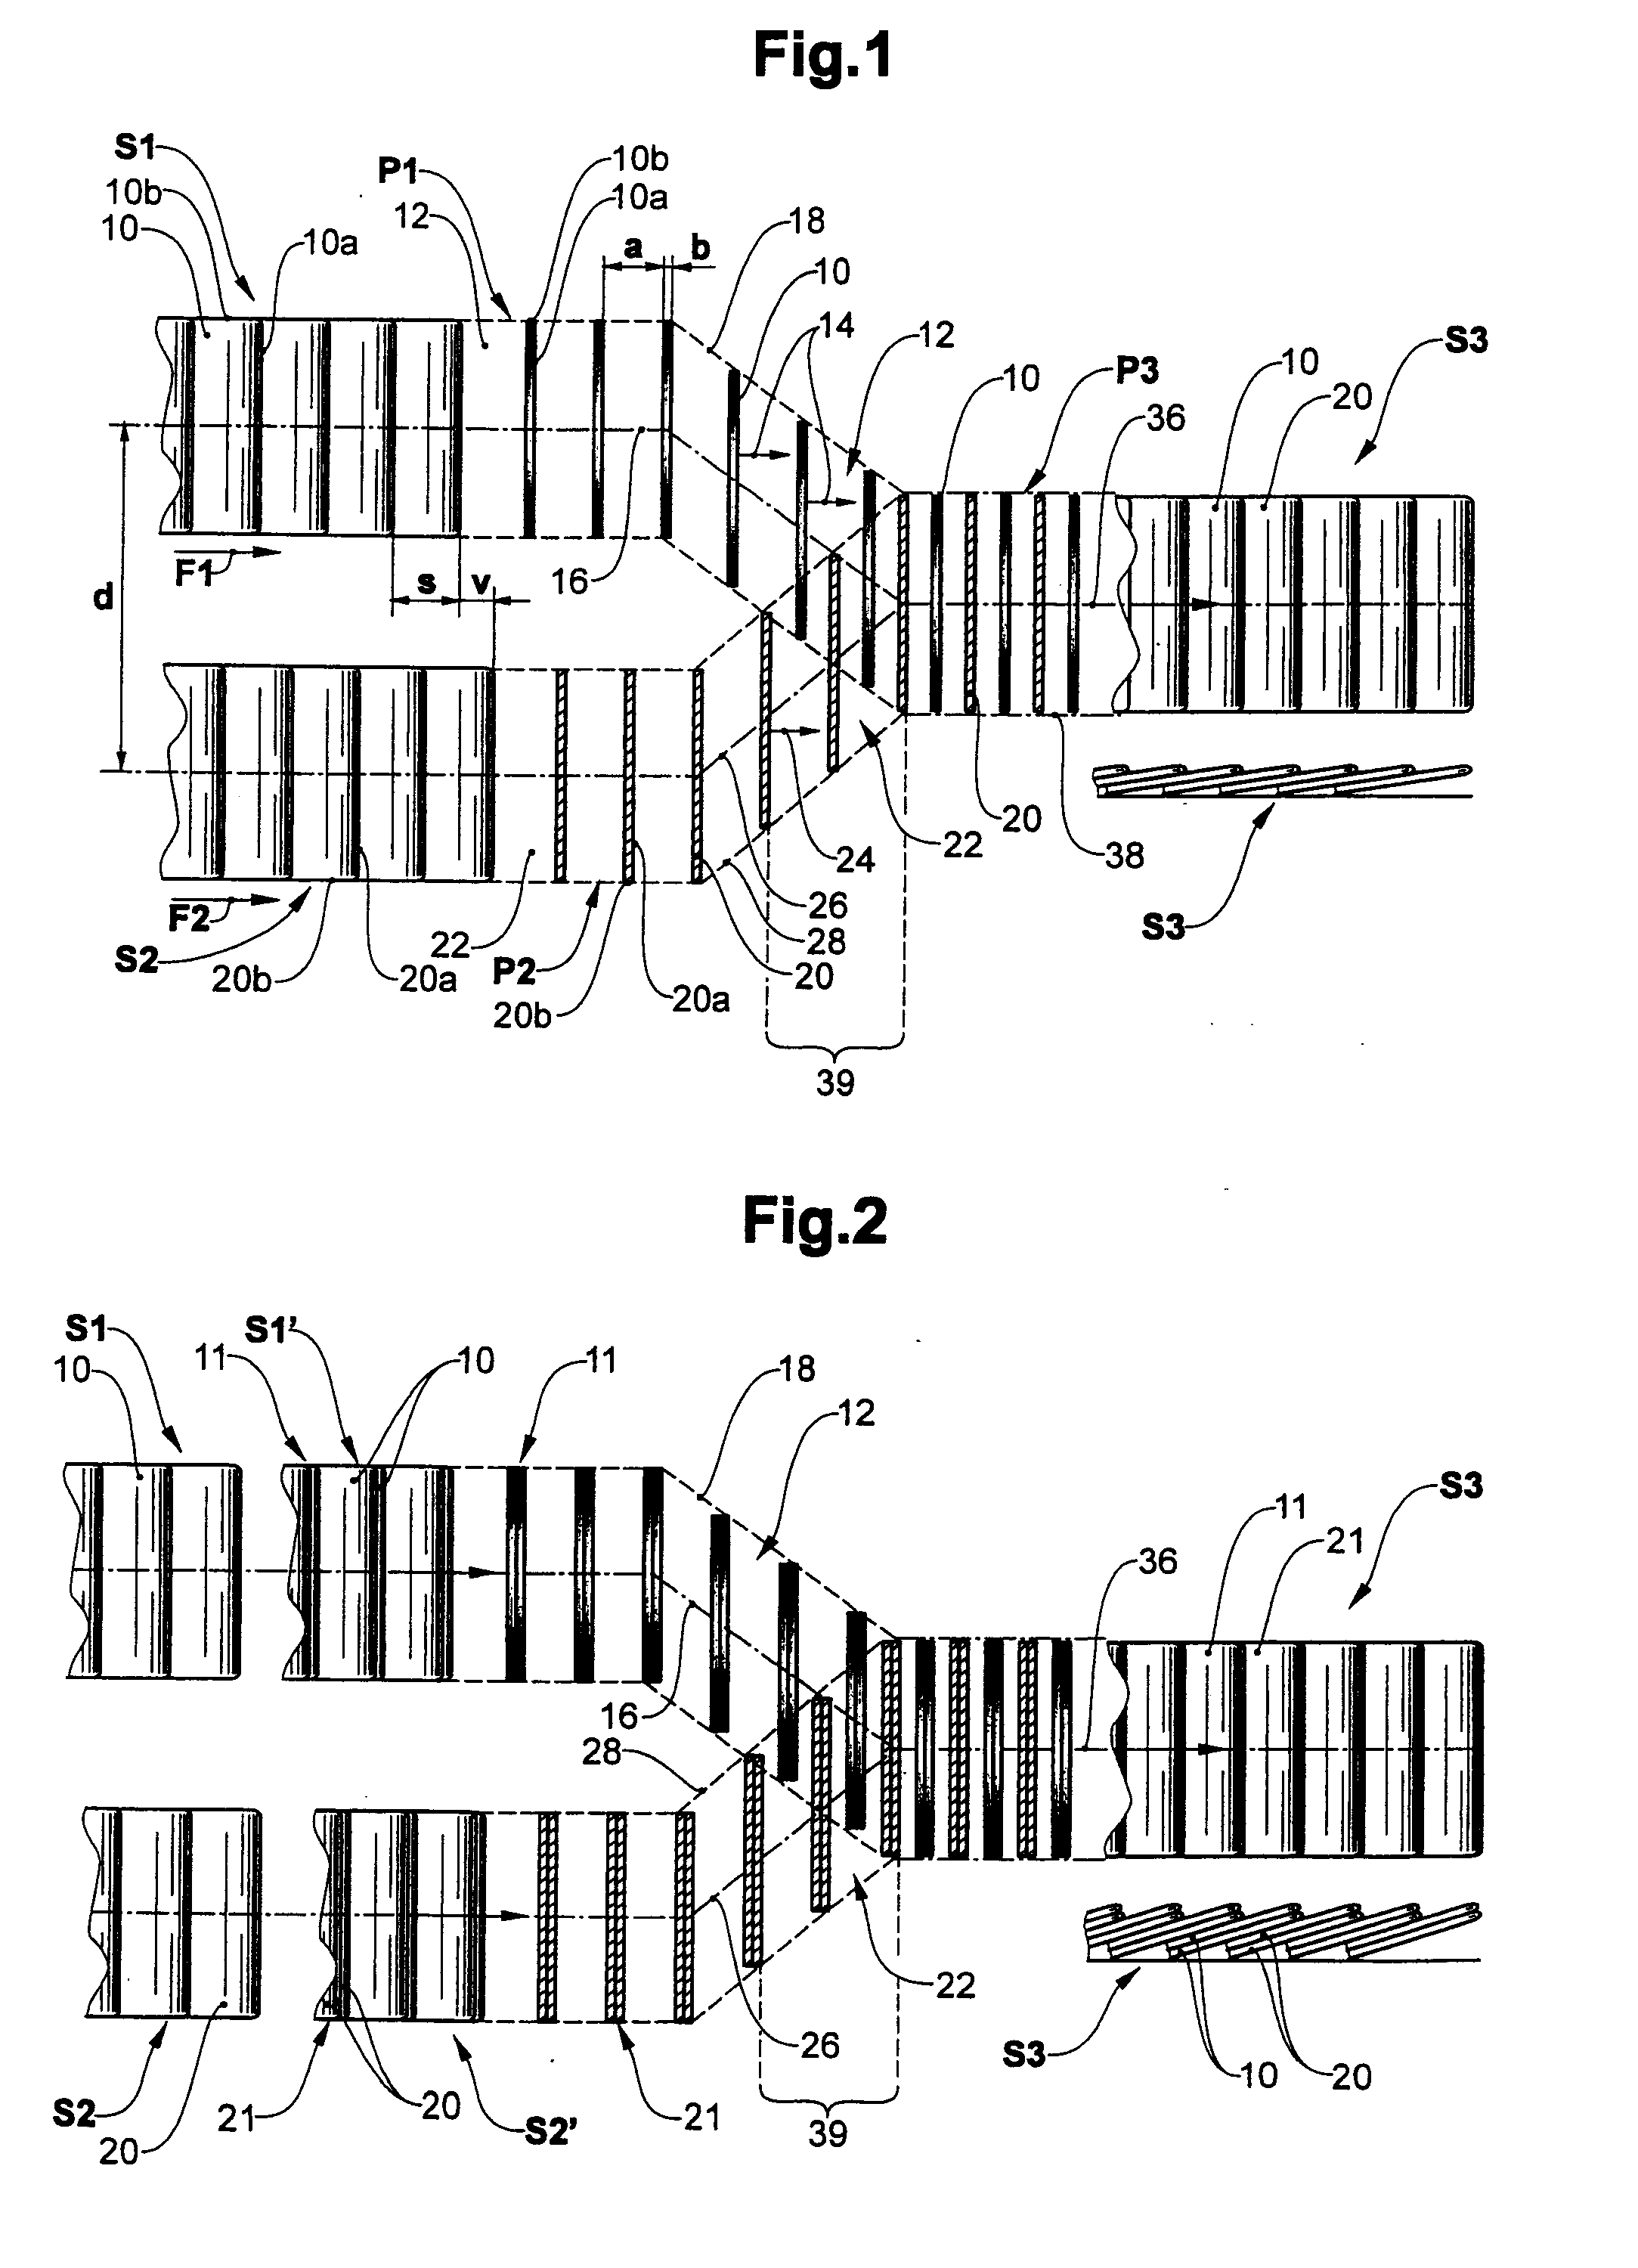 Method and device for unifying imbricated flows